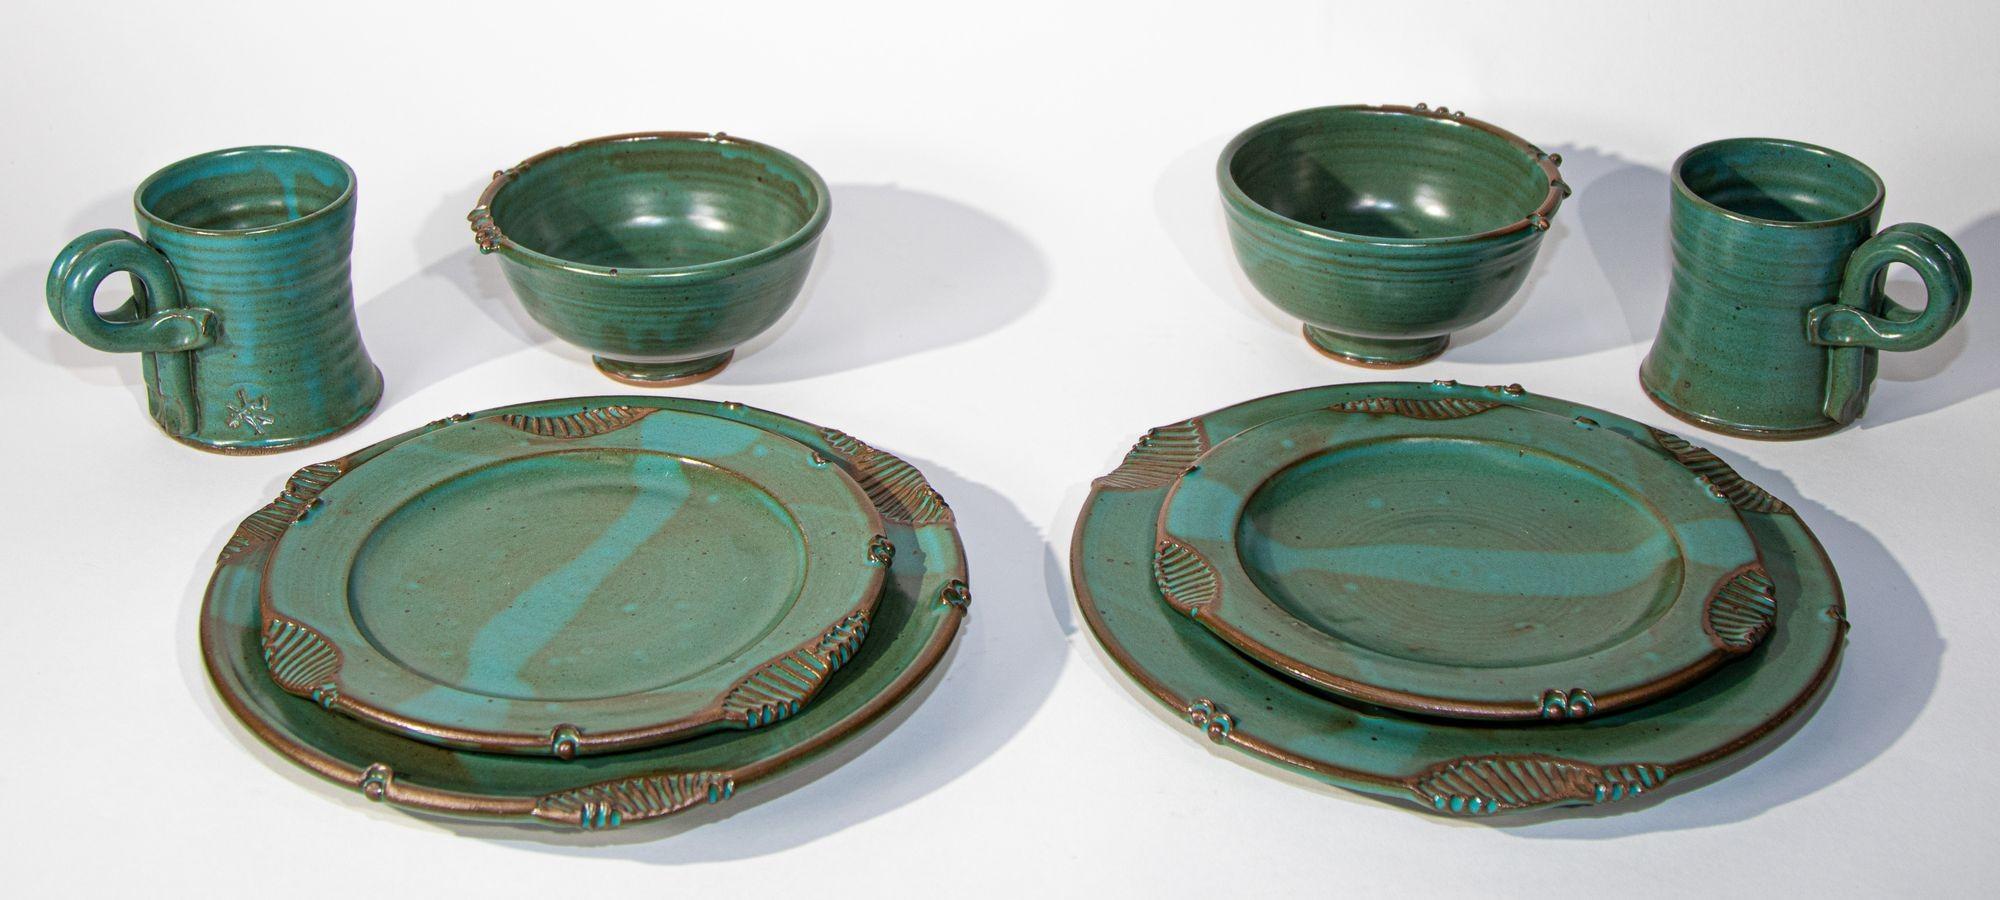 Paul Anthony Vintage Teal Green Stoneware Service Set of 8 For Sale 7